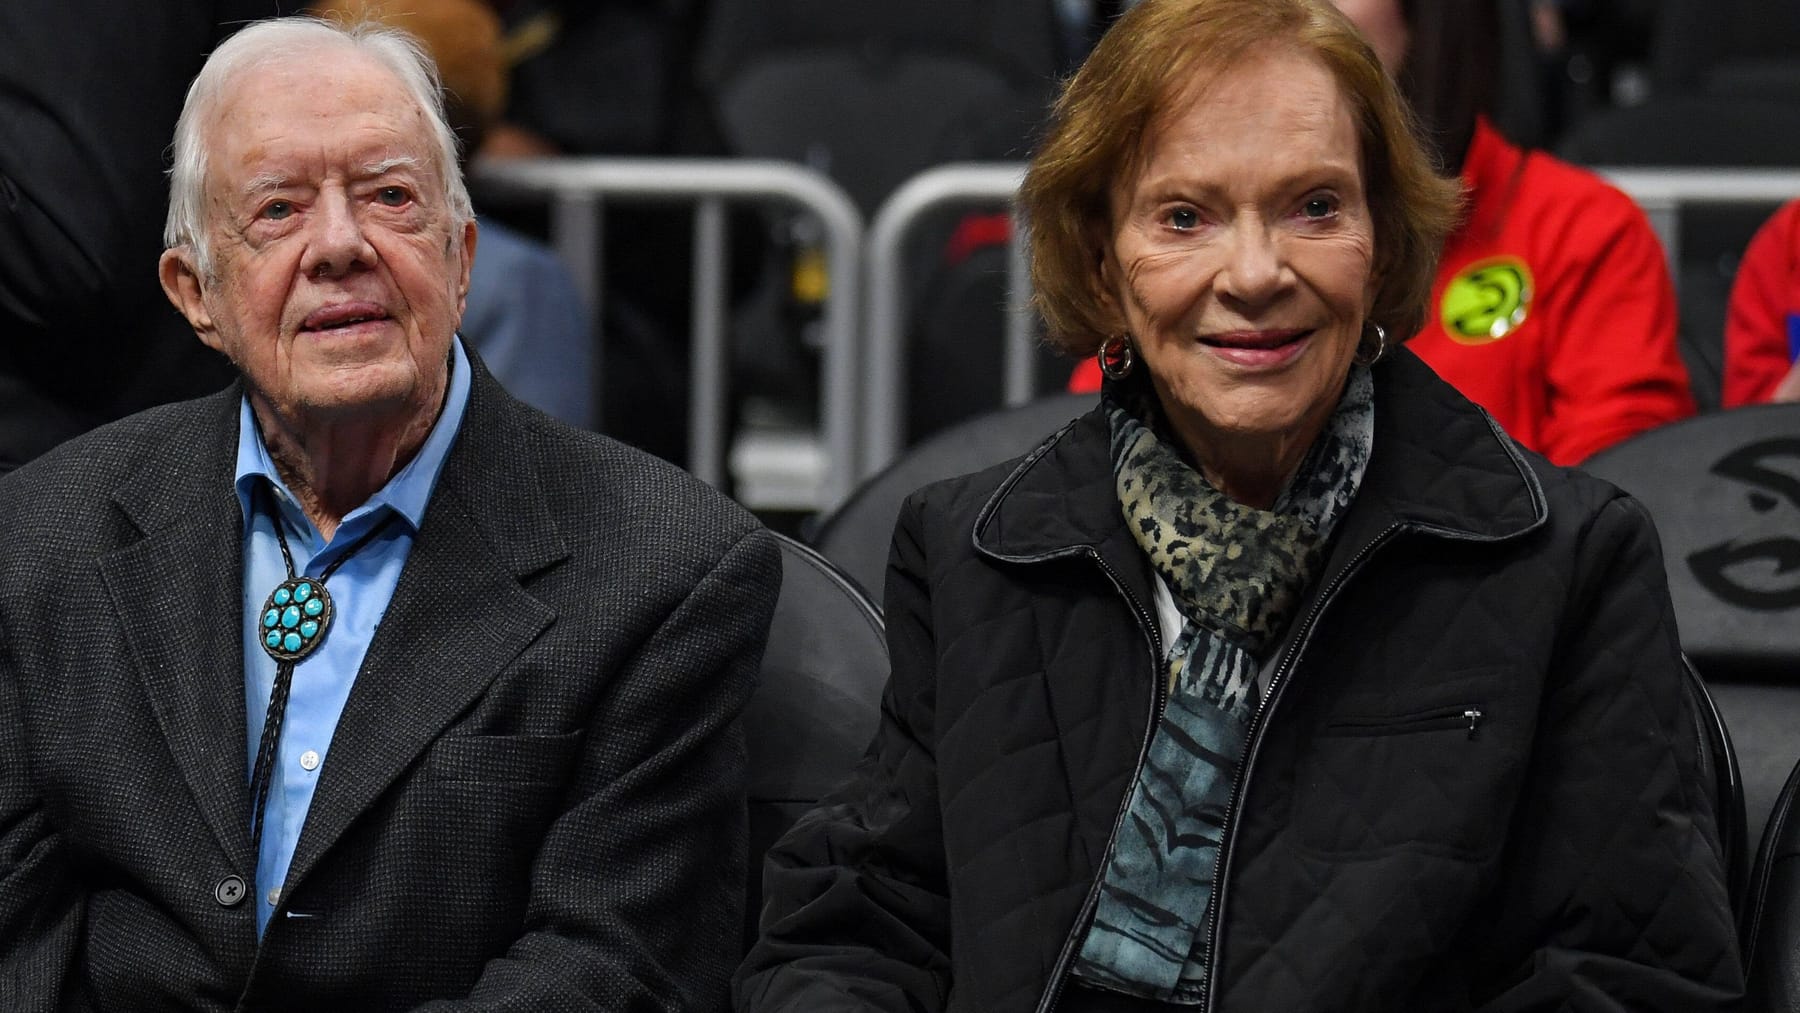 Rosalynn Carter: The former First Lady suffers from dementia